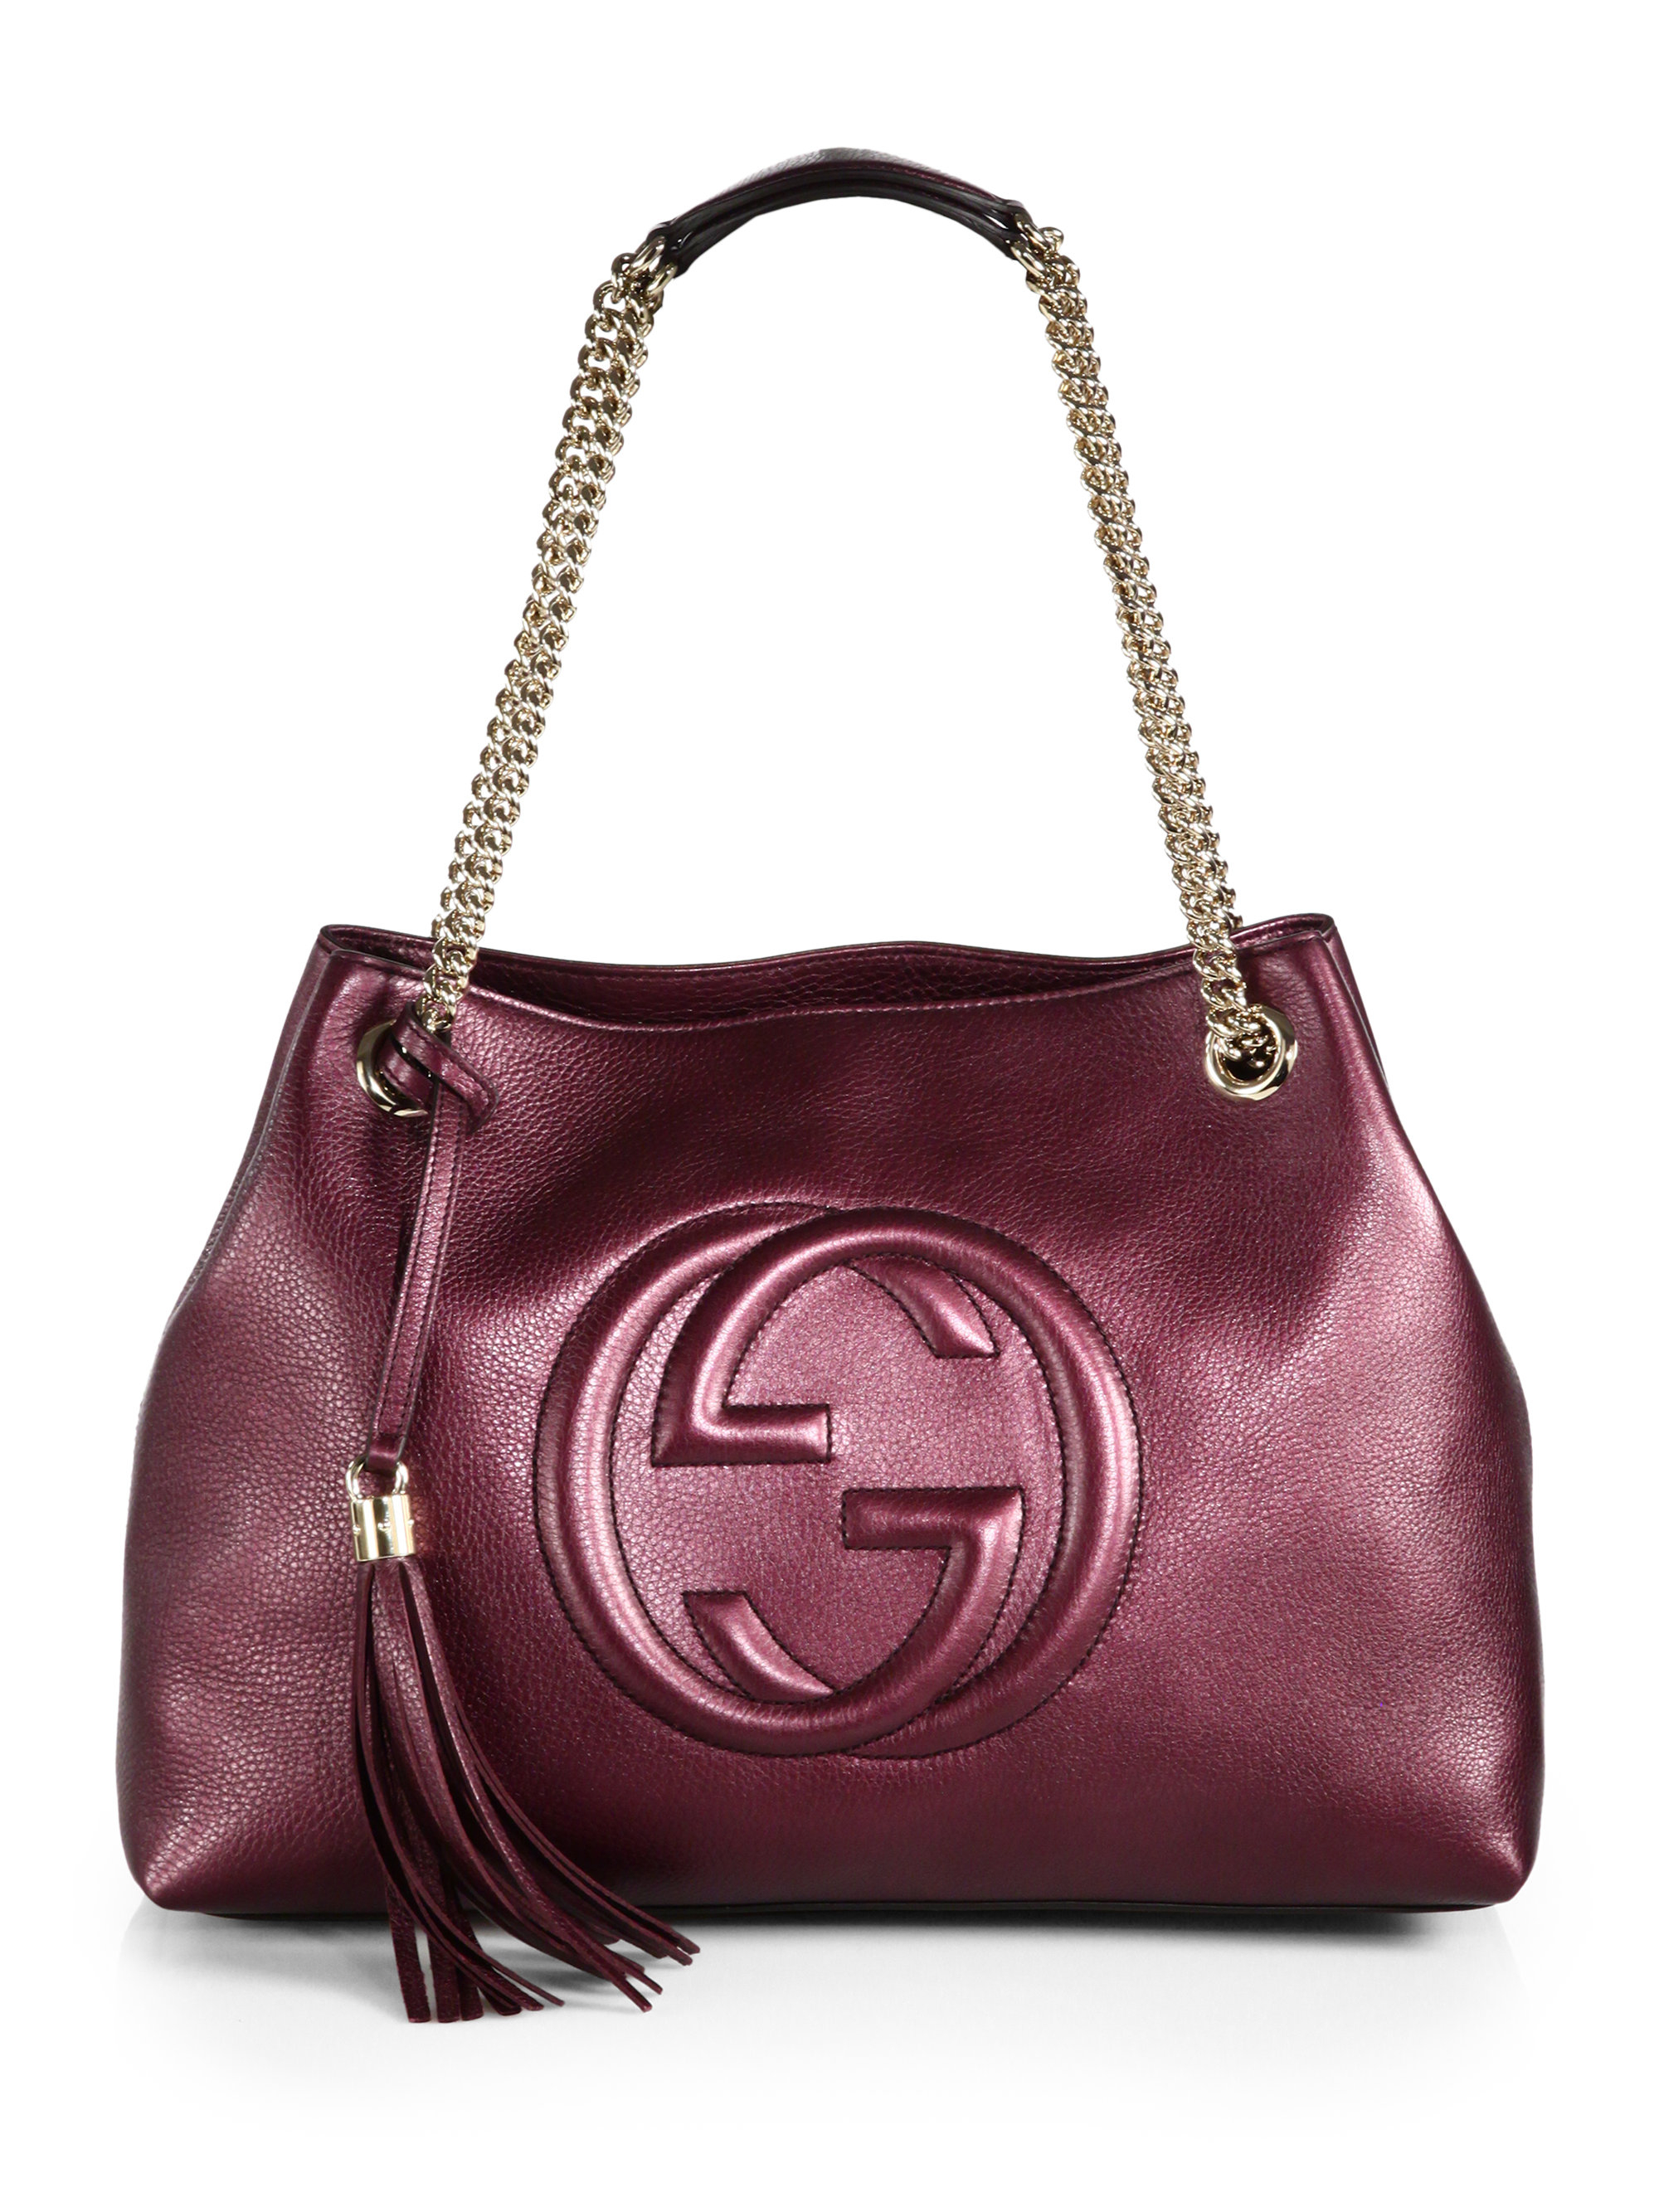 Lyst - Gucci Soho Metallic Leather Shoulder Bag in Red